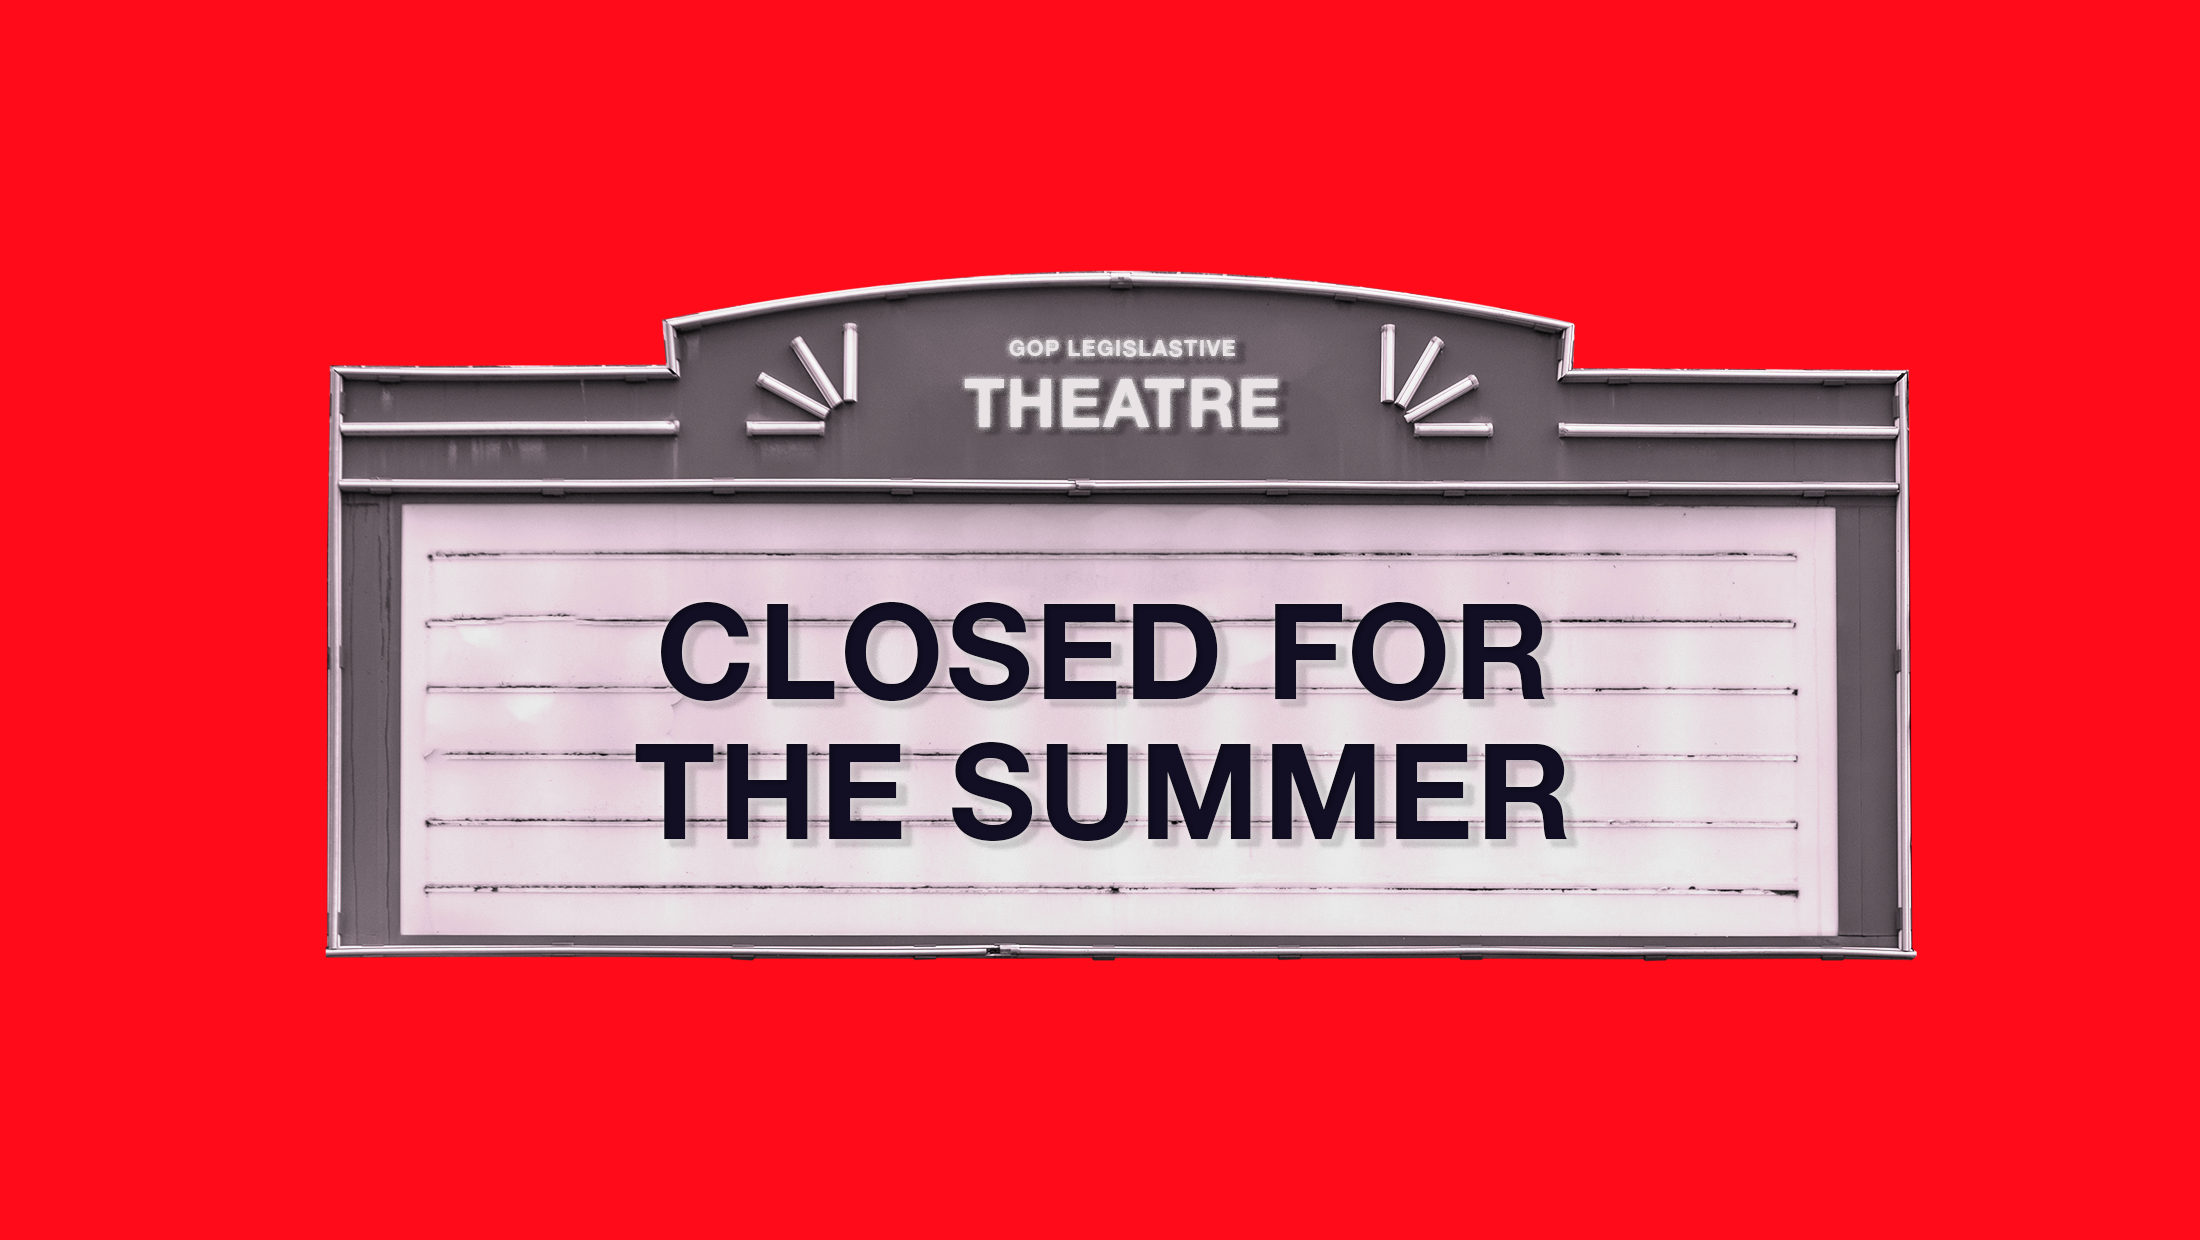 A vintage theater marquee sign that says "GOP LEGISLATIVE THEATRE...CLOSED FOR THE SUMMER"